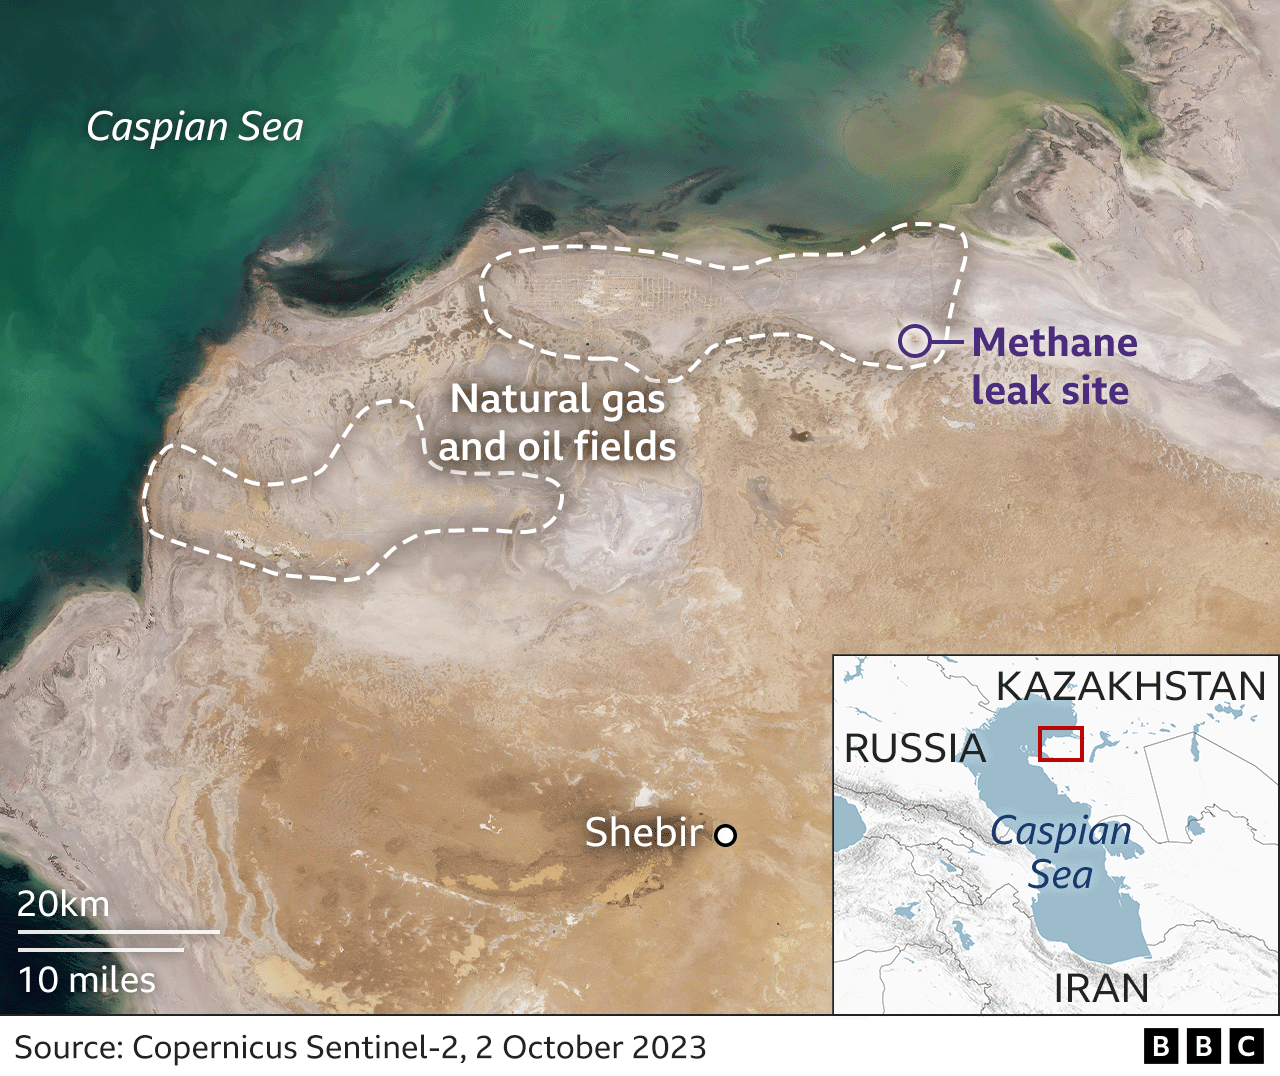 Map of the Kazakh region where the methane leak is thought to have taken place